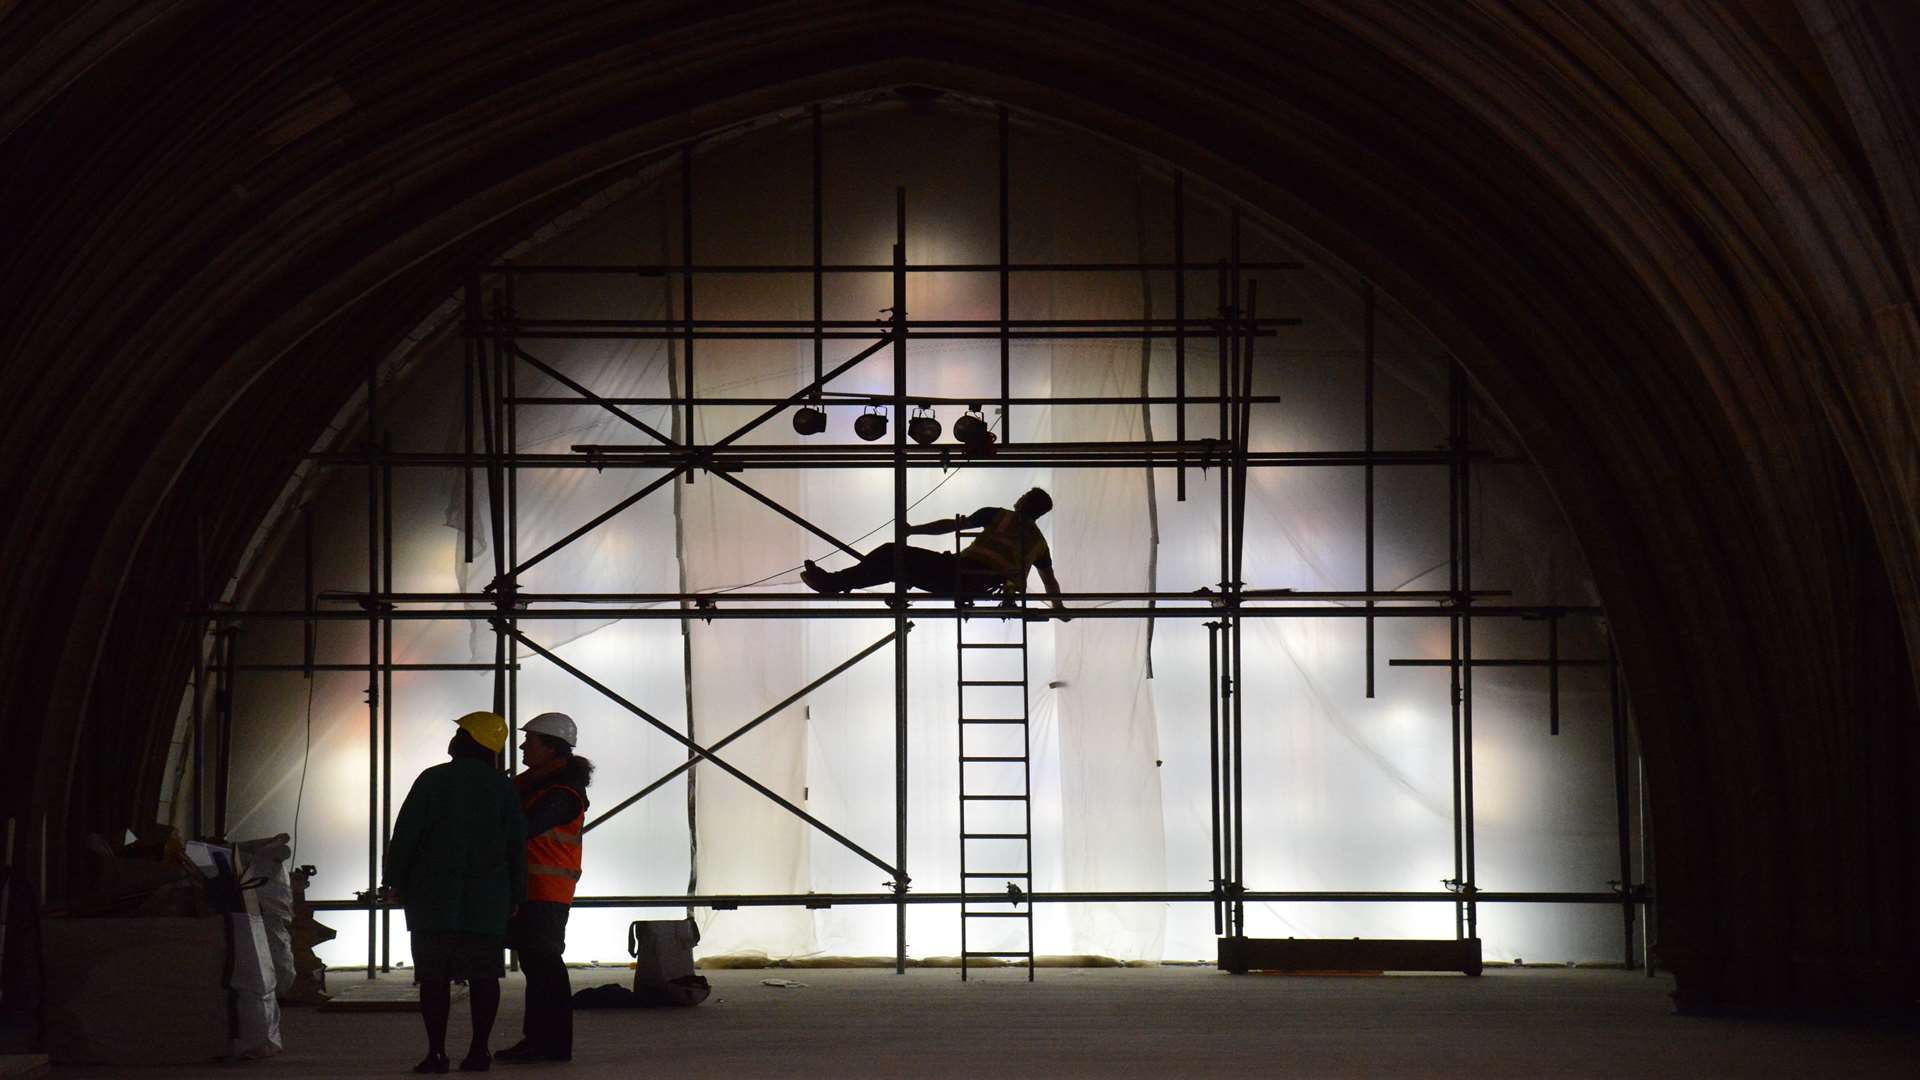 Stunning pictures show the ongoing work inside the cathedral.